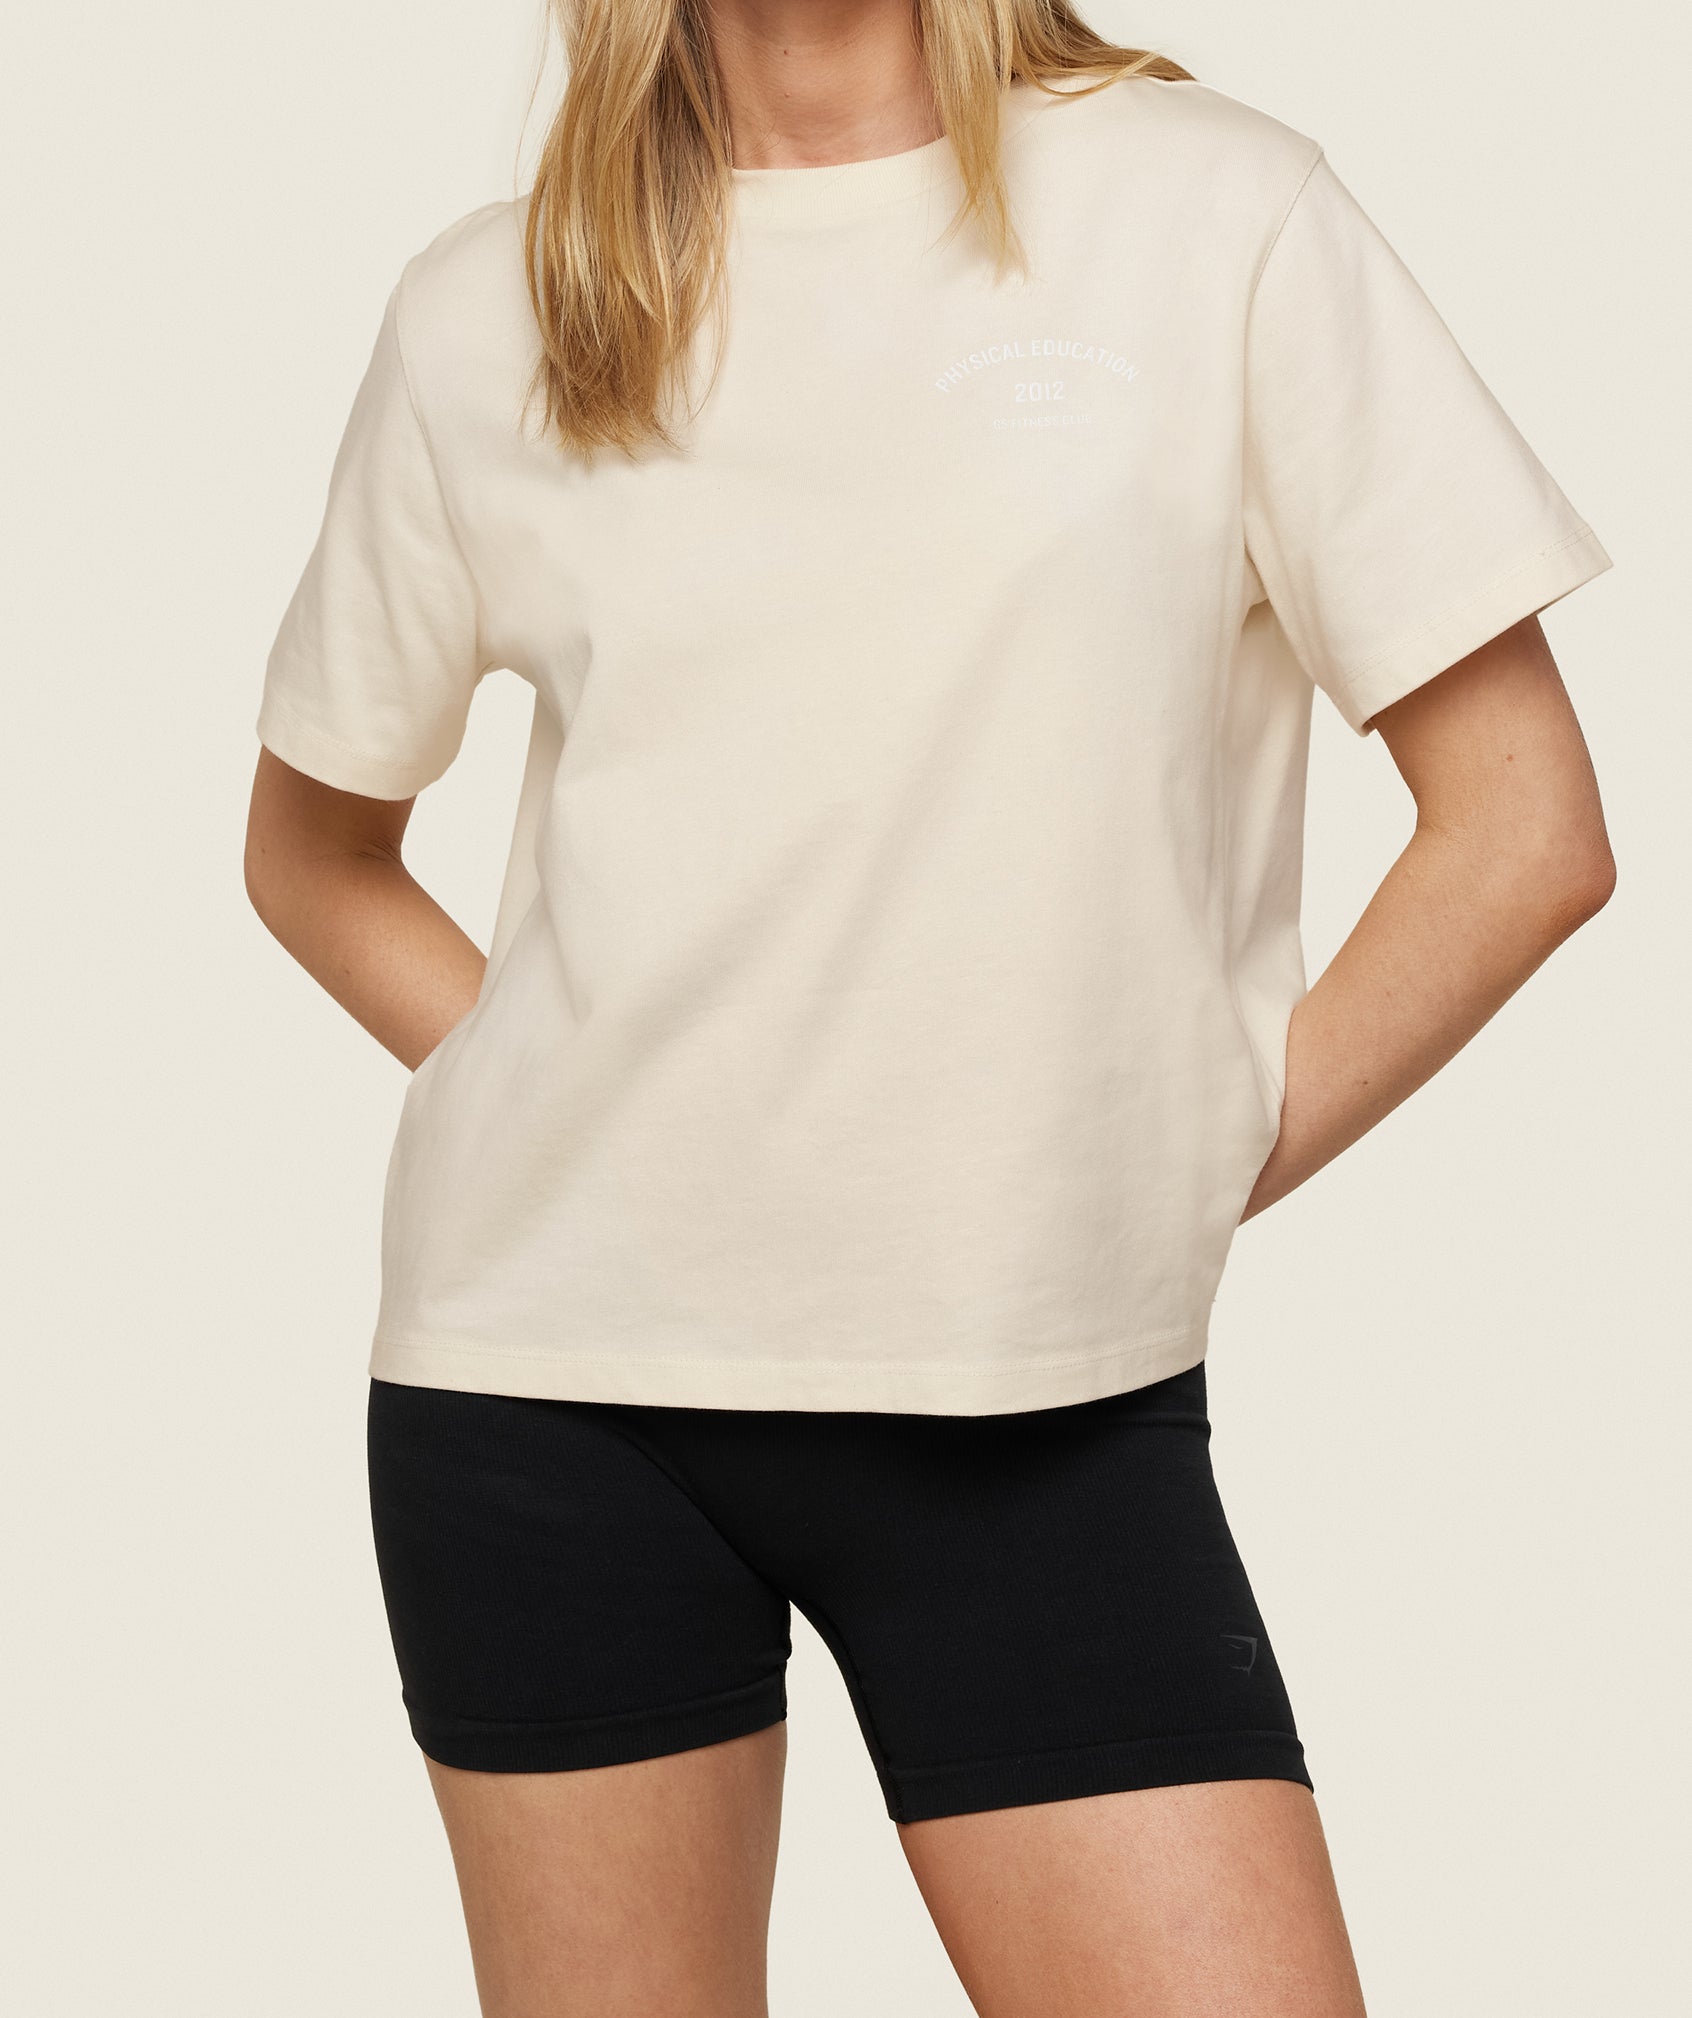 Phys Ed Graphic T-Shirt in Ecru White - view 3